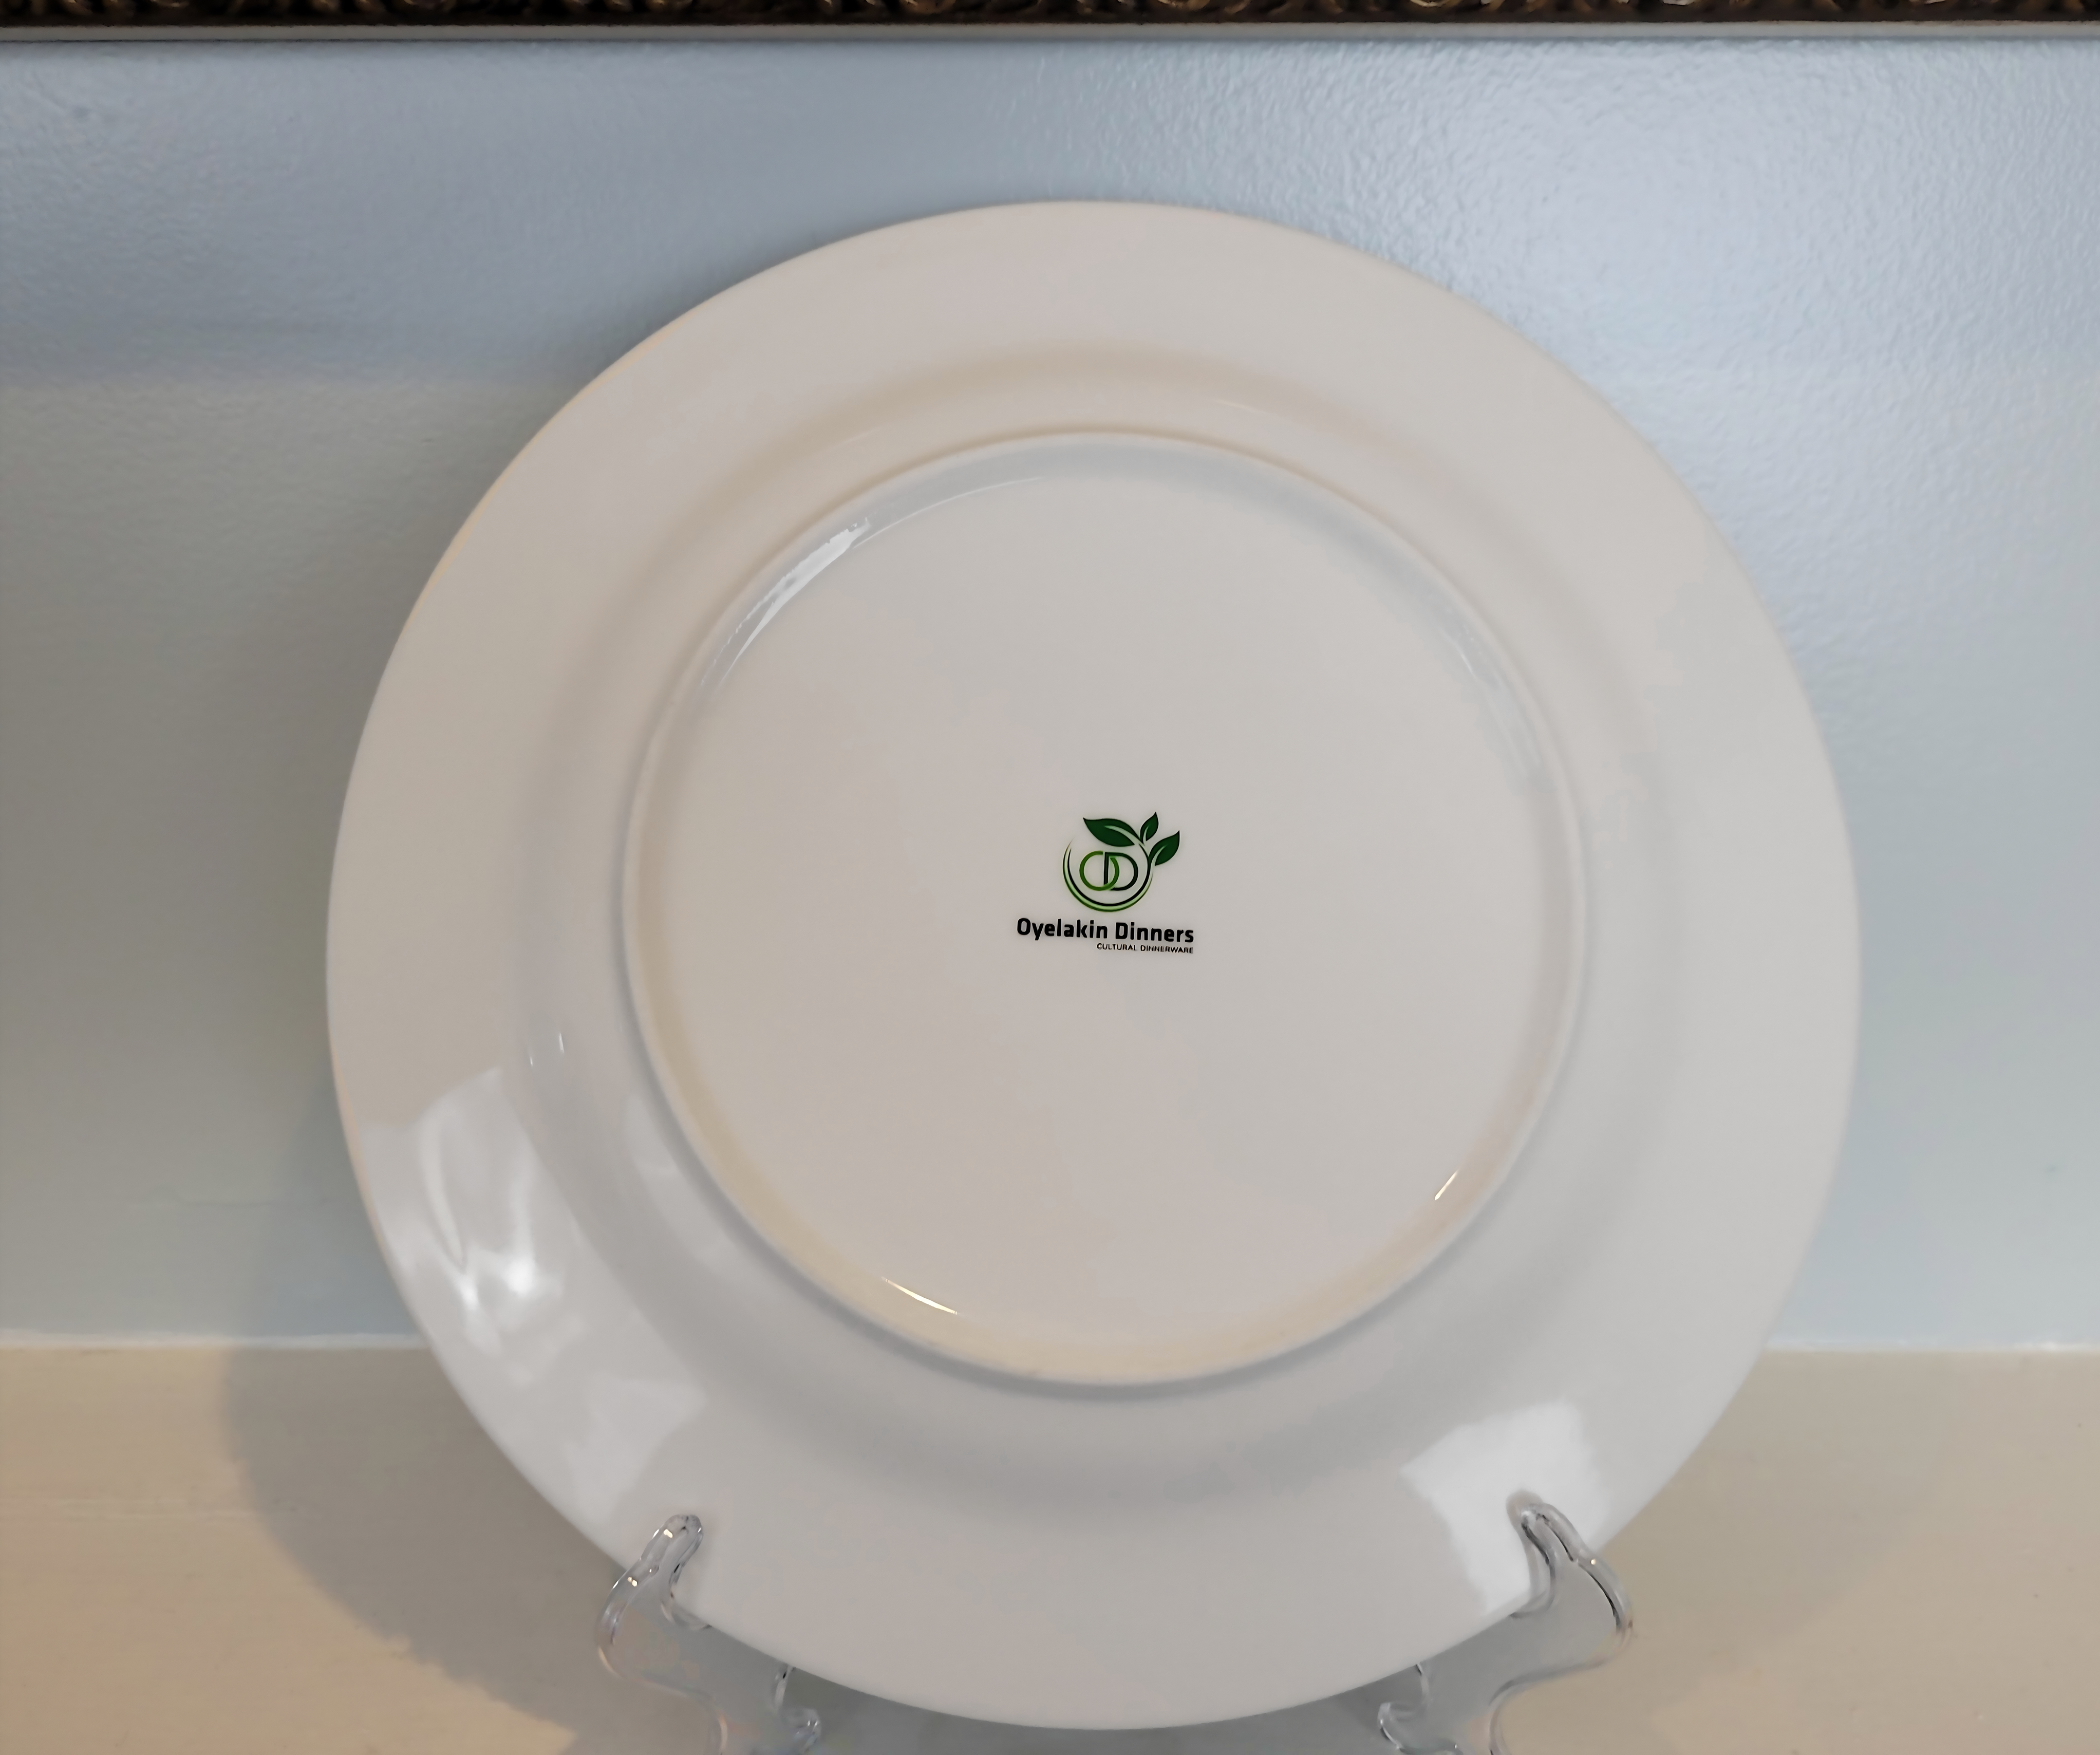 This is displaying the back of a dinner plate placed on a plate easel.  The back of the plate shows the brand logo 